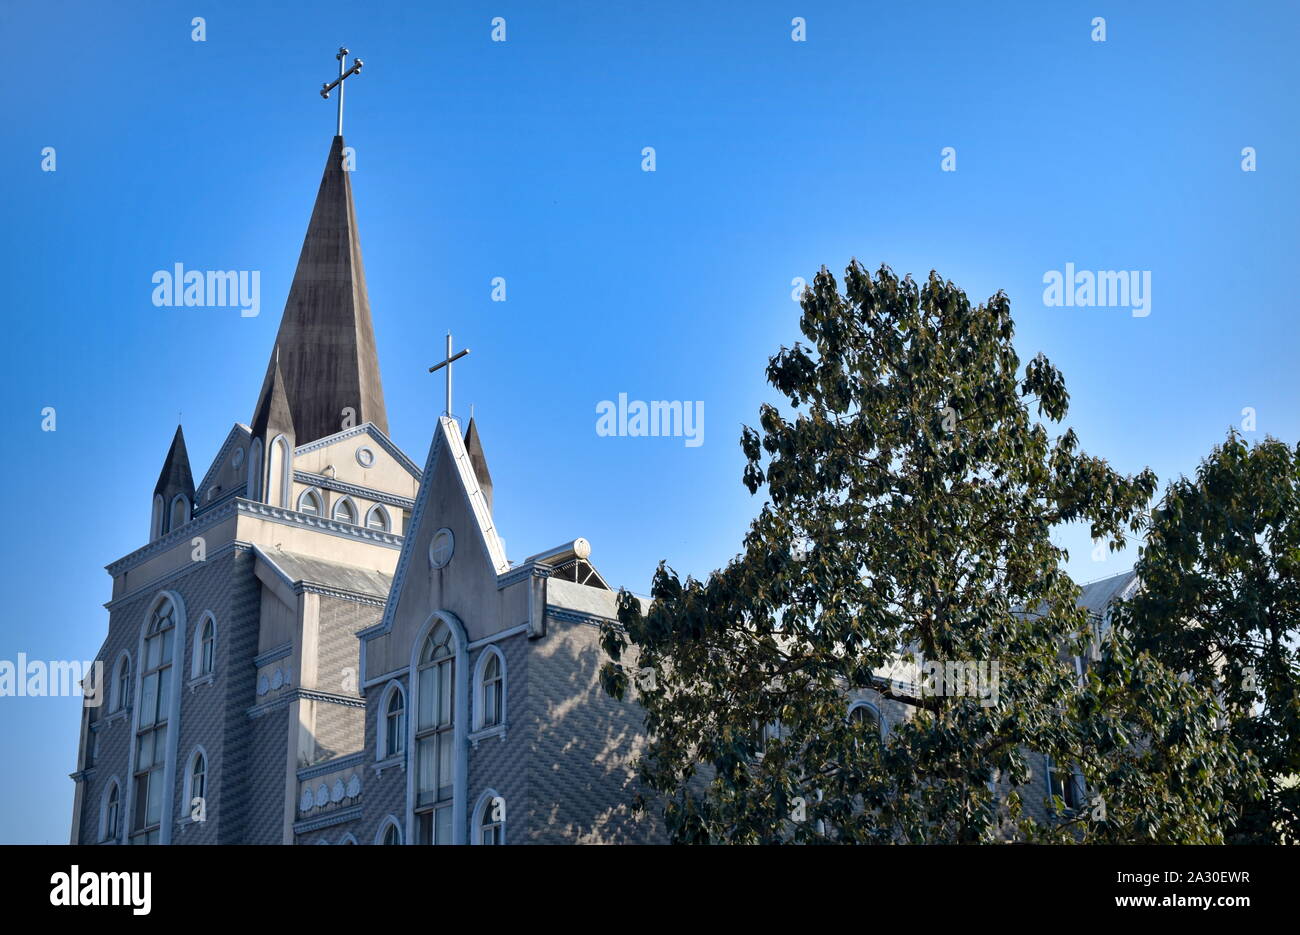 Christianity in China: Guilin large Catholic church tower and crosses Stock Photo